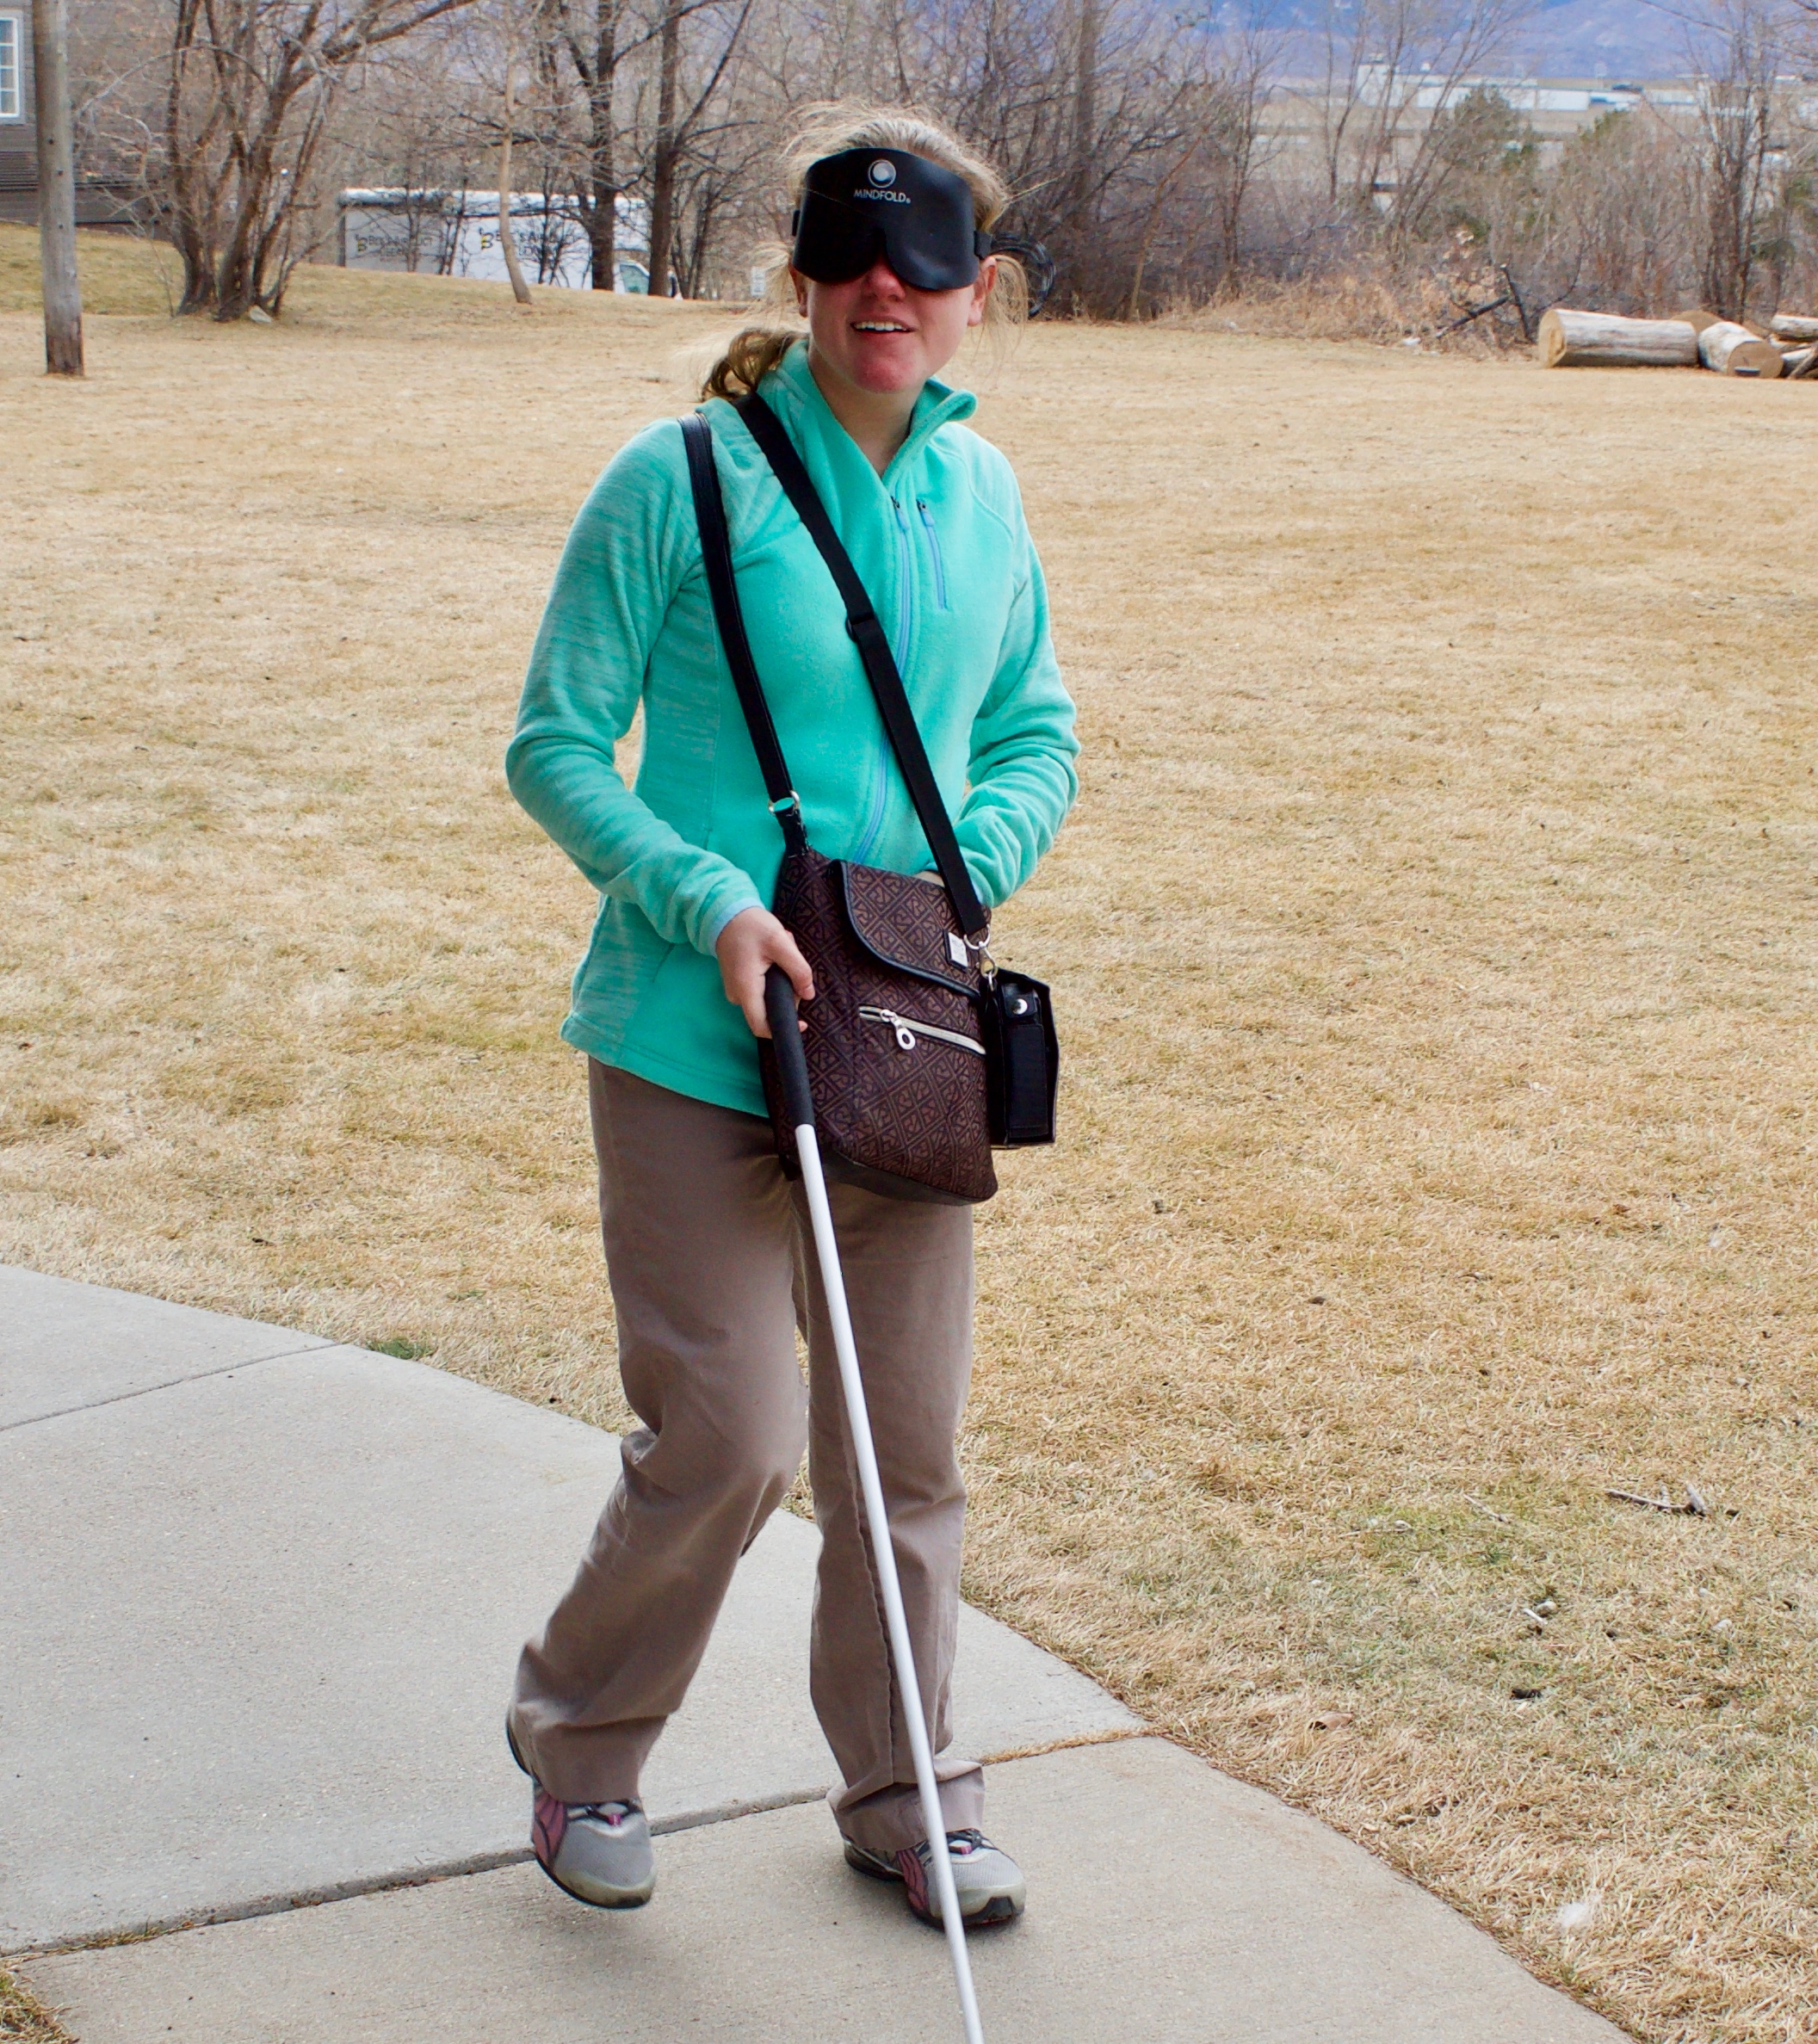 Julie M. traveling with her cane and sleepshades